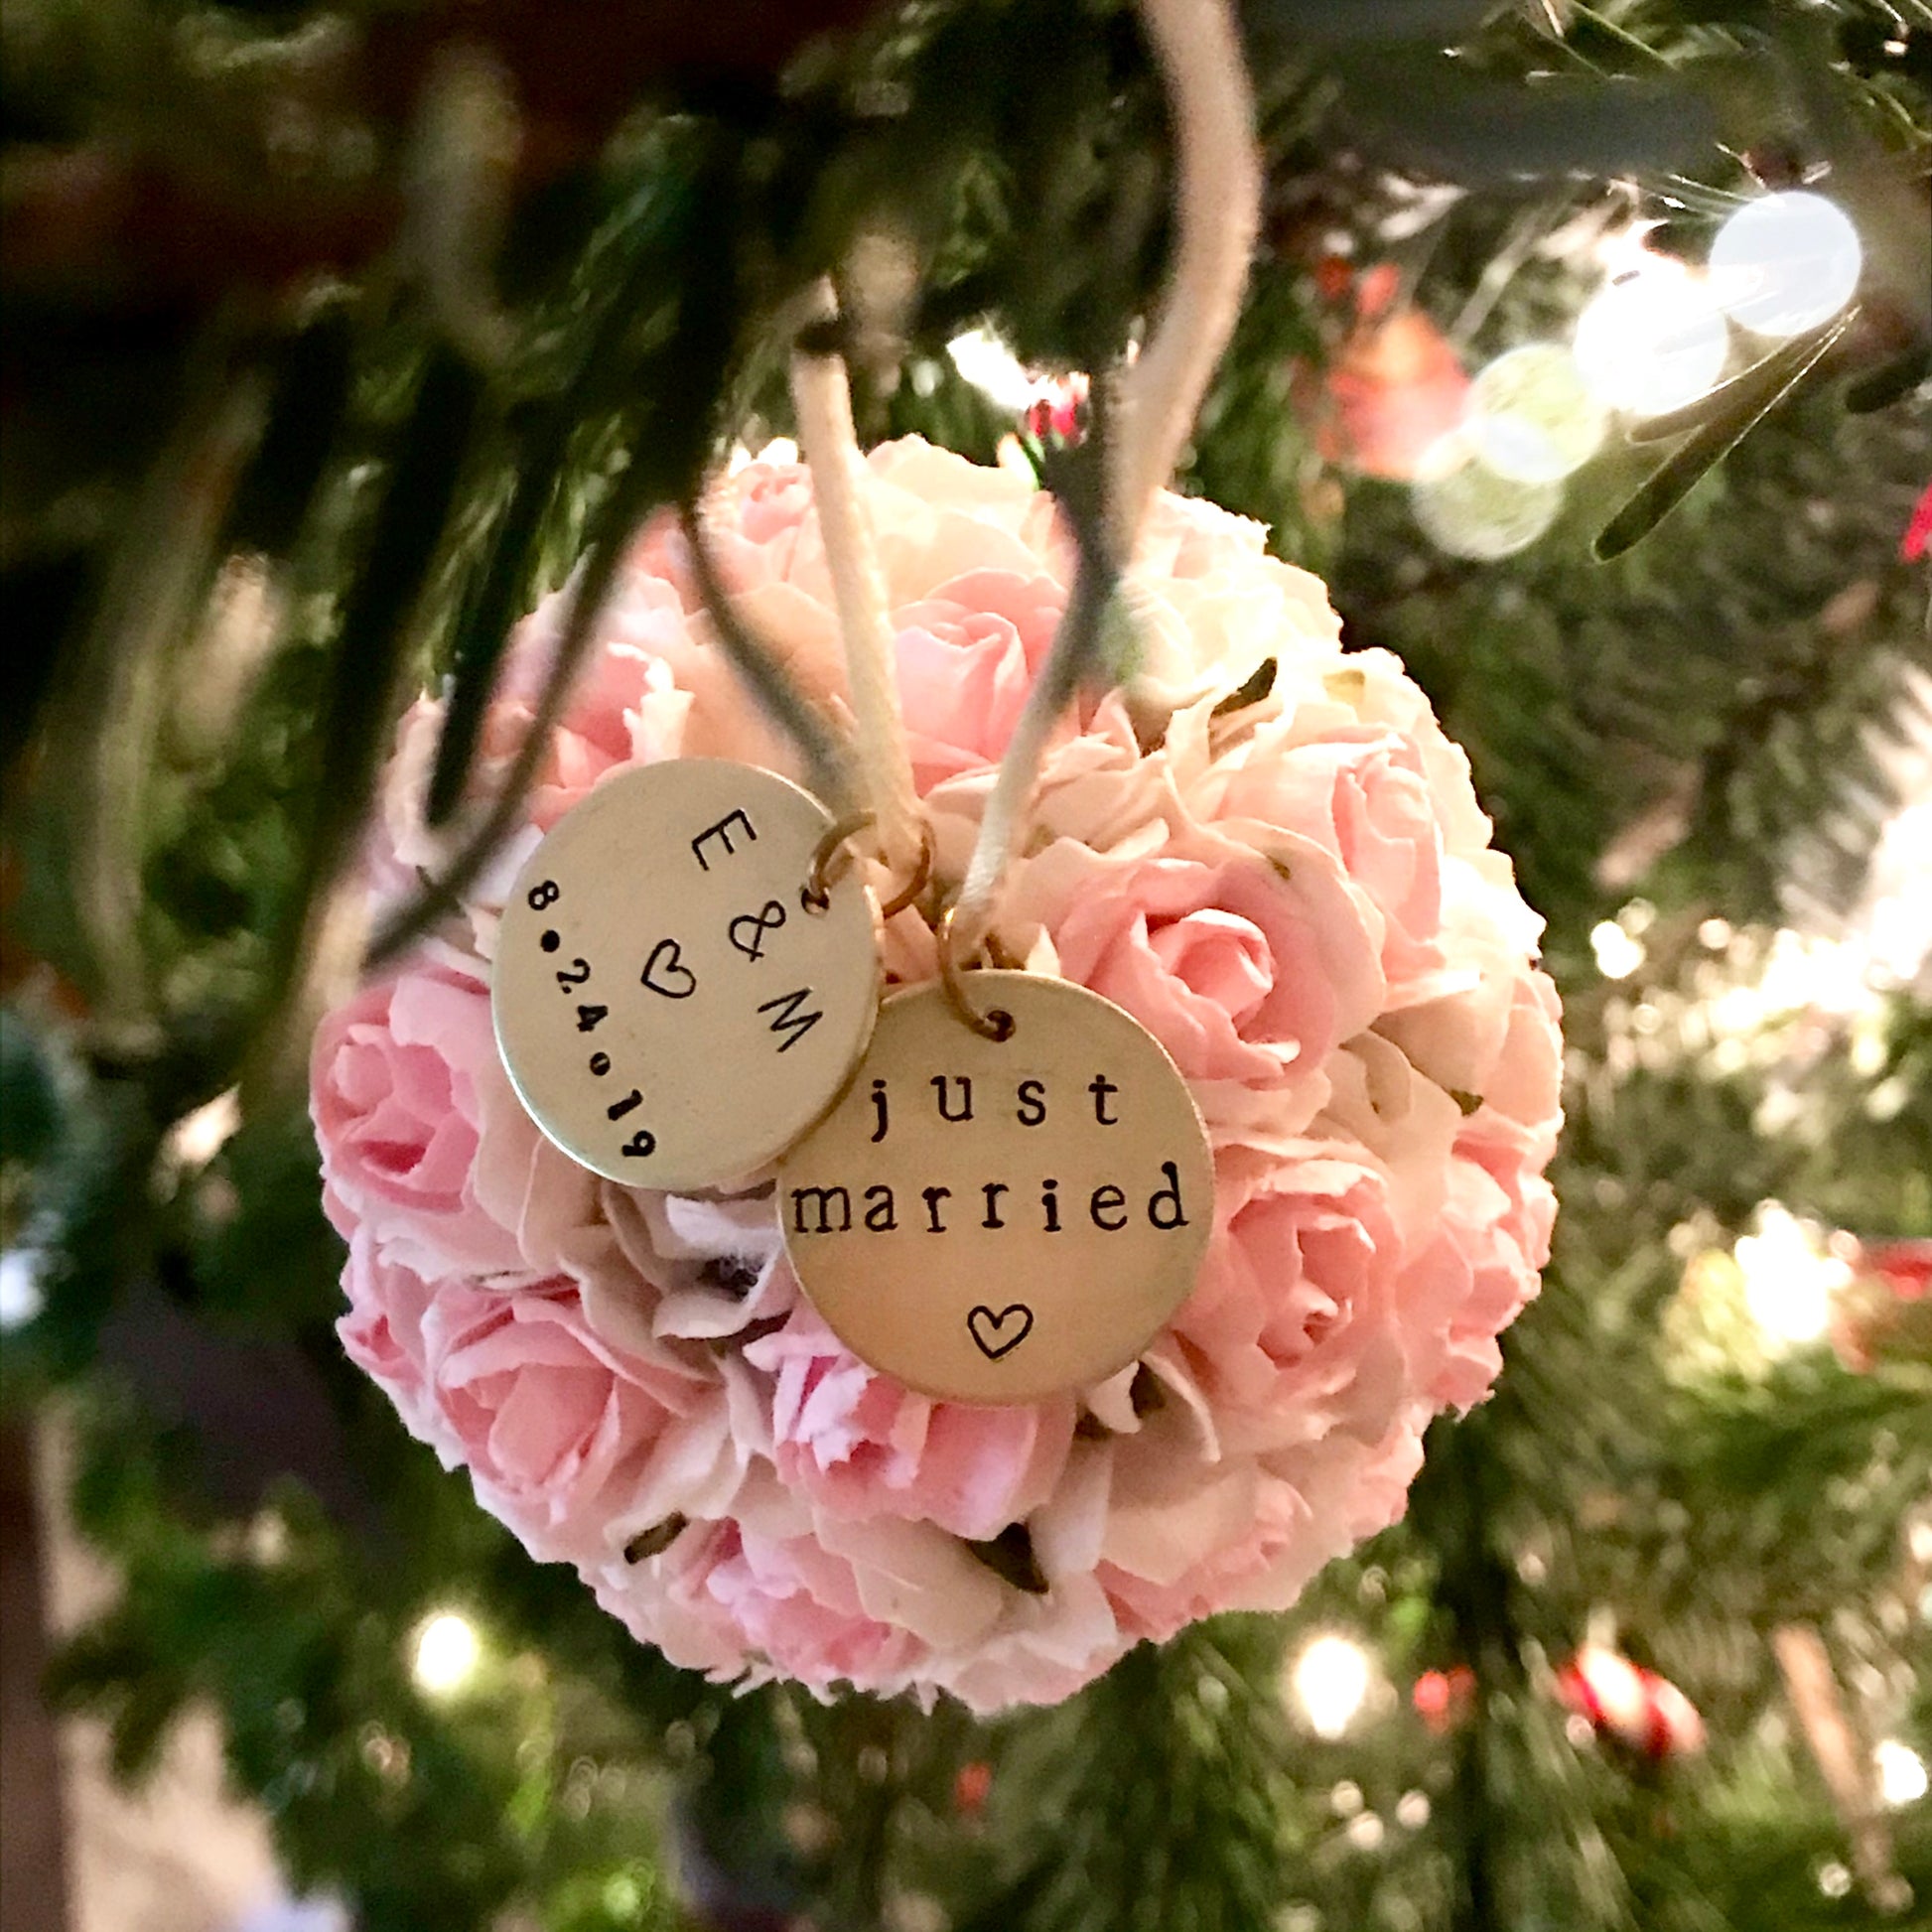 First Christmas Married Ornament 2023-1st Christmas as Mr and Mrs Wedding  Gifts, Newlywed Gifts, Bridal Shower Gifts for Couples, Bride Gifts, Just